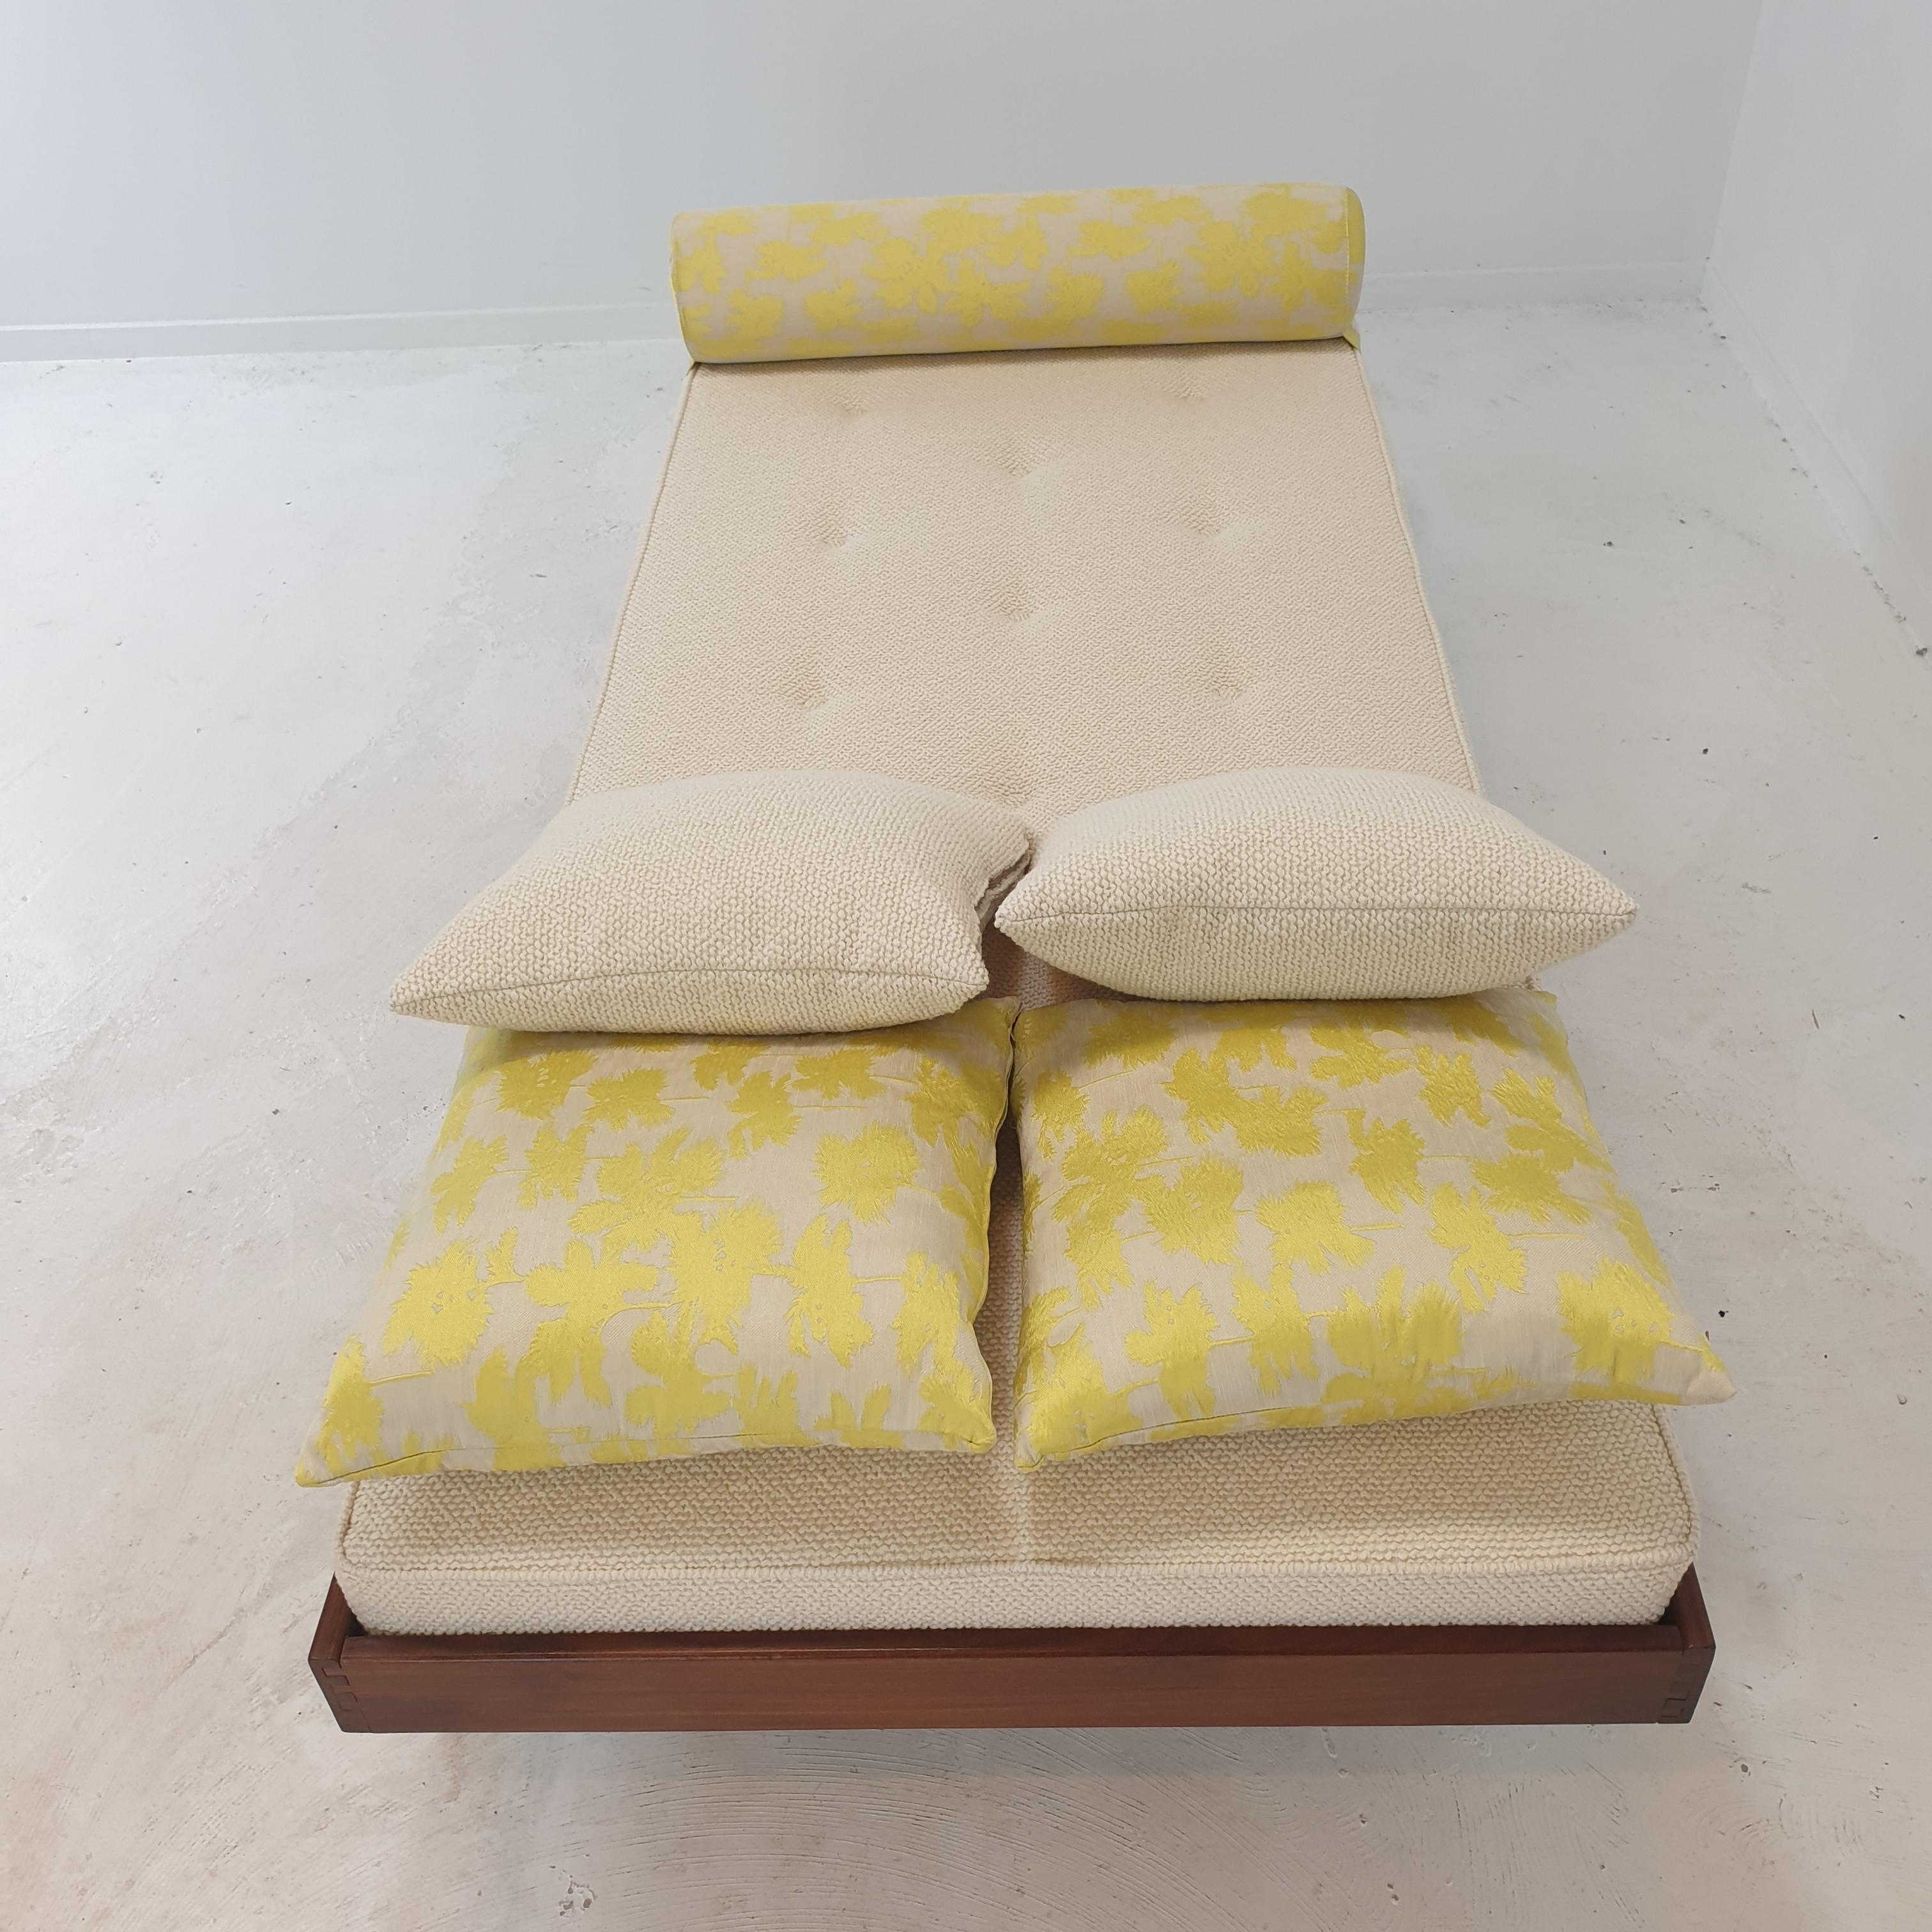 Teak Daybed with Dedar Cushions and Bolster, 1960s For Sale 1